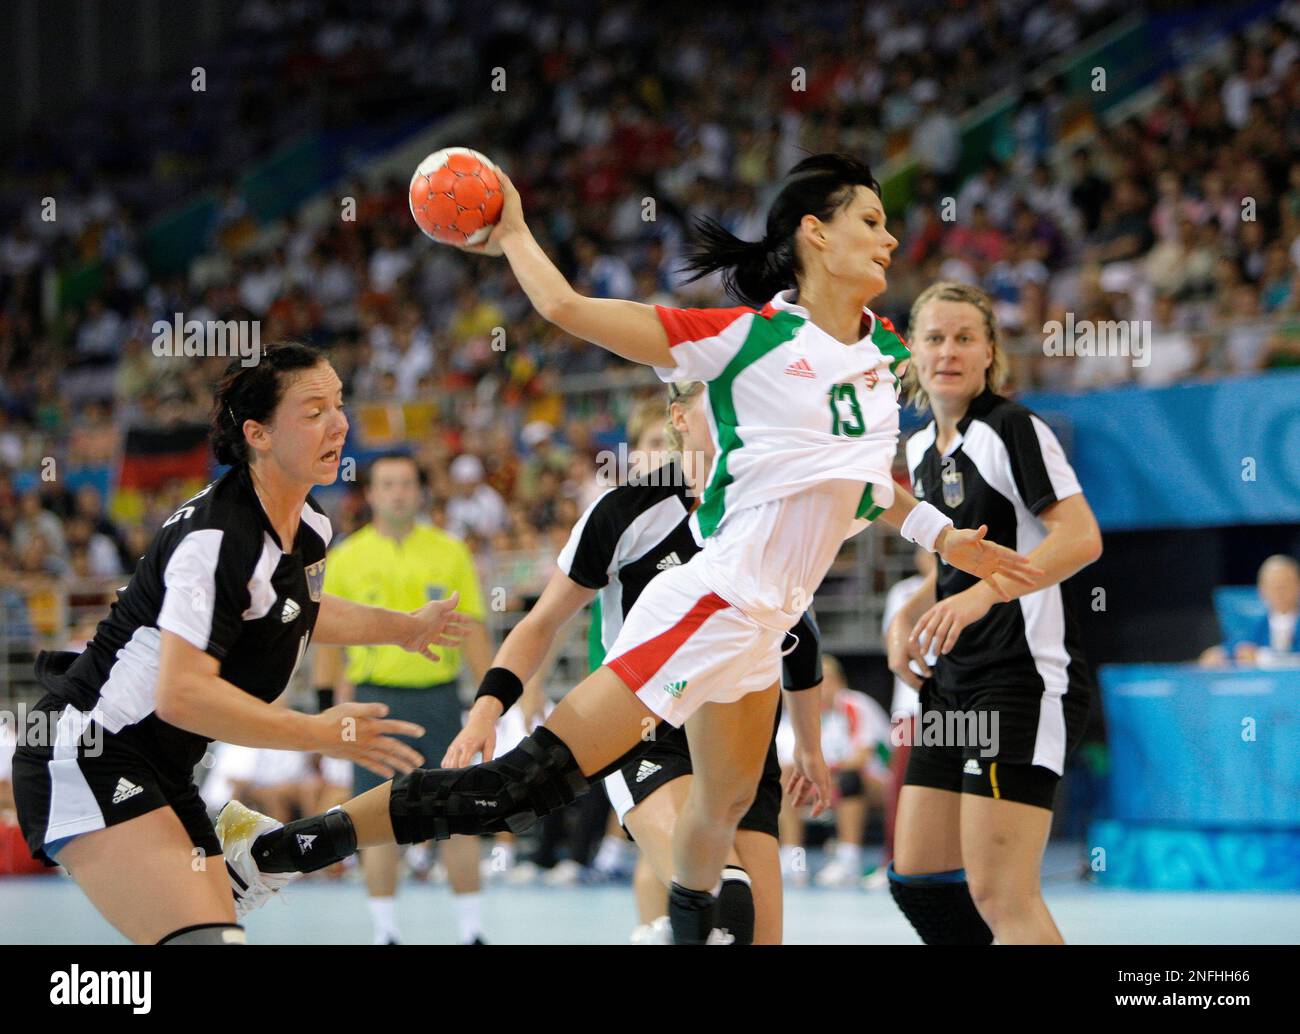 Hungary's Anita Gorbicz shoots against Germany during their women's  handball preliminary match at the Beijing 2008 Olympics in Beijing,  Wednesday, Aug. 13, 2008. (AP Photo/Lee Jin-man Stock Photo - Alamy